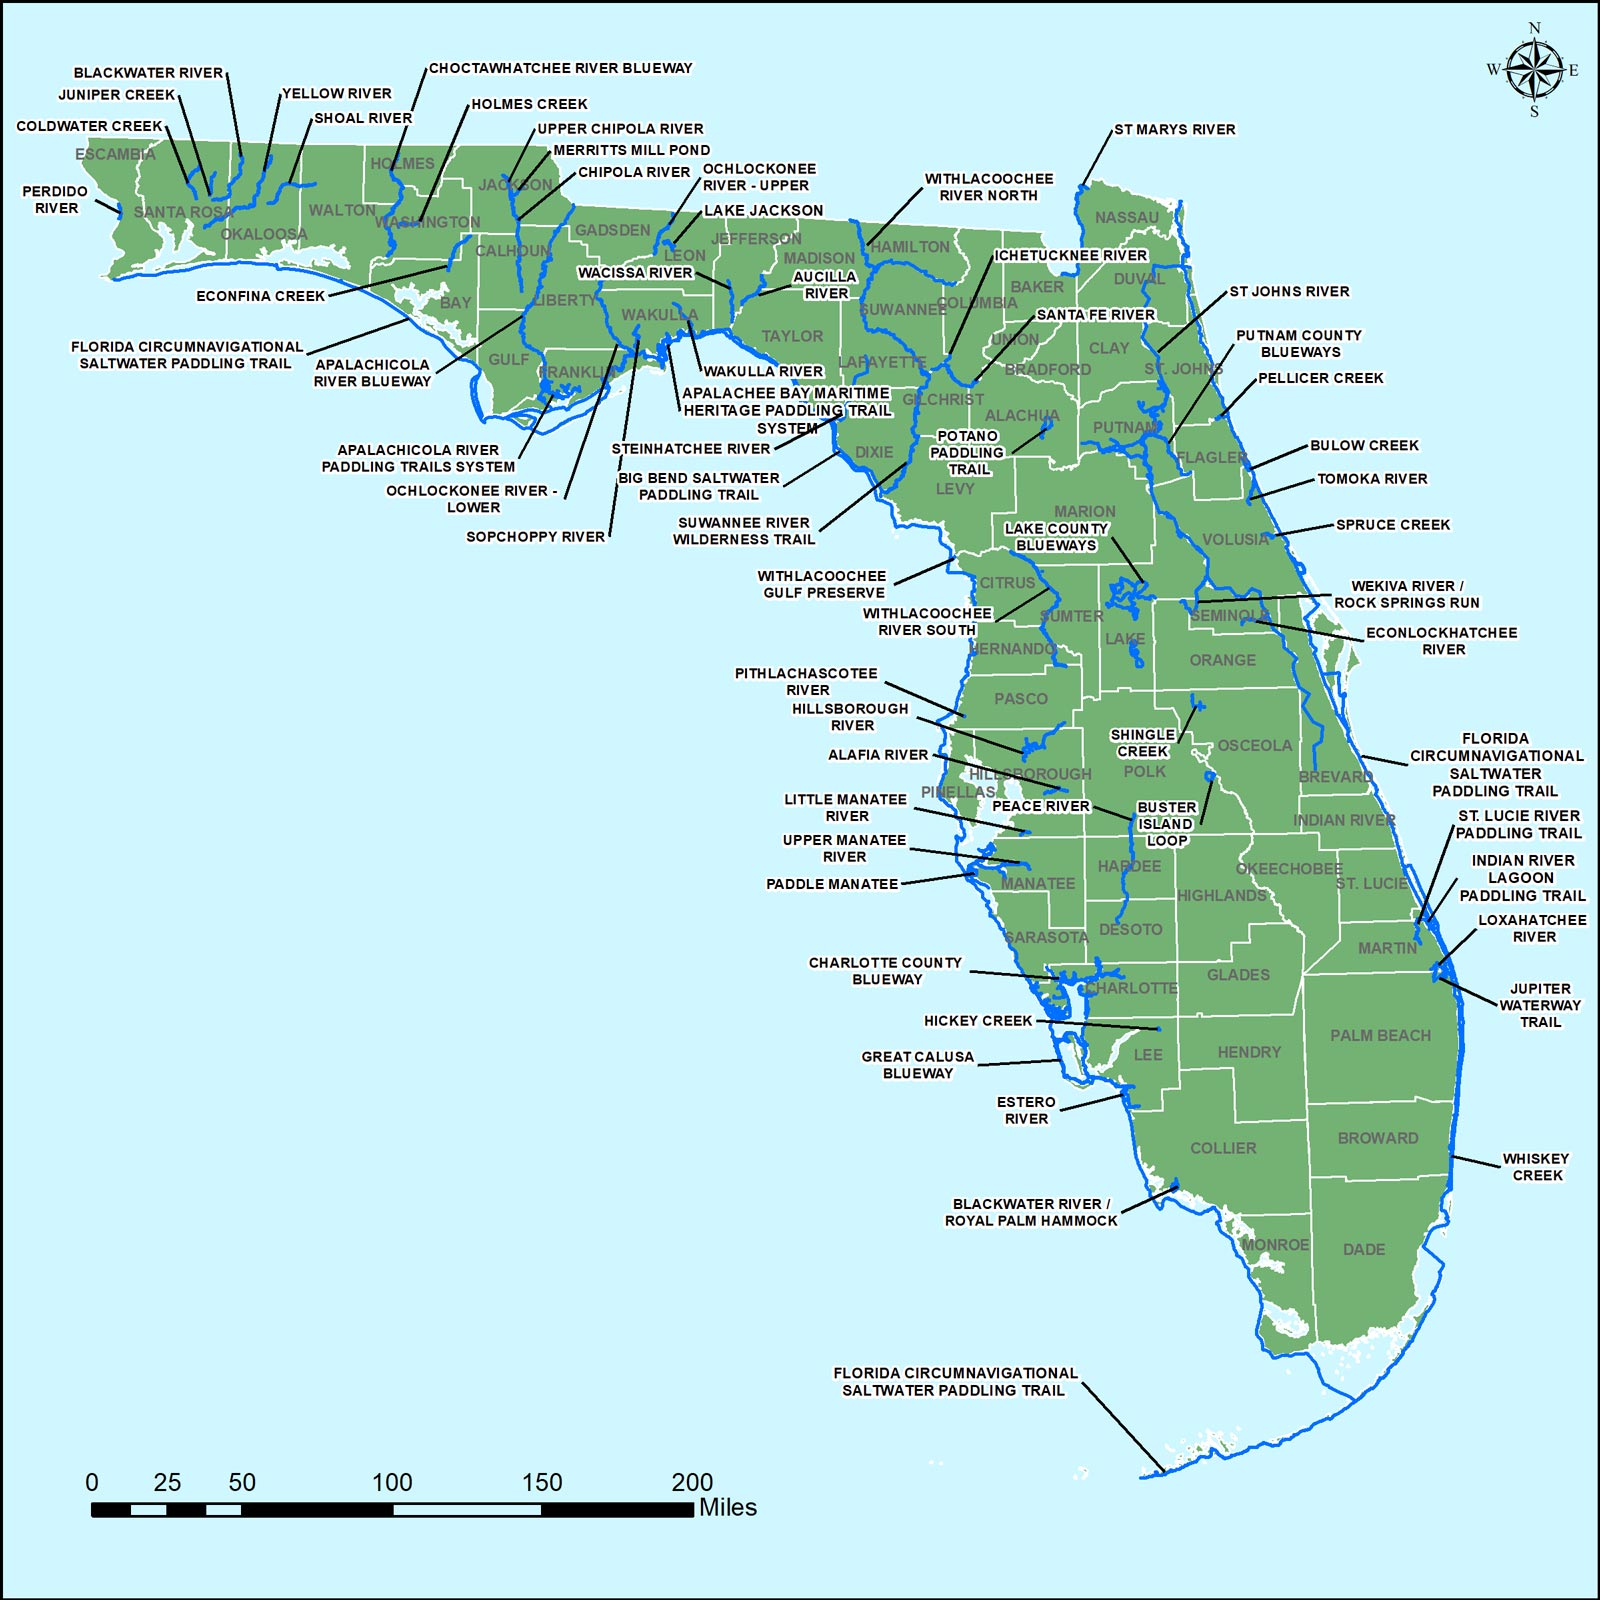 May 2018 map of Florida designated paddling trails by the Office of Greenways and Trails